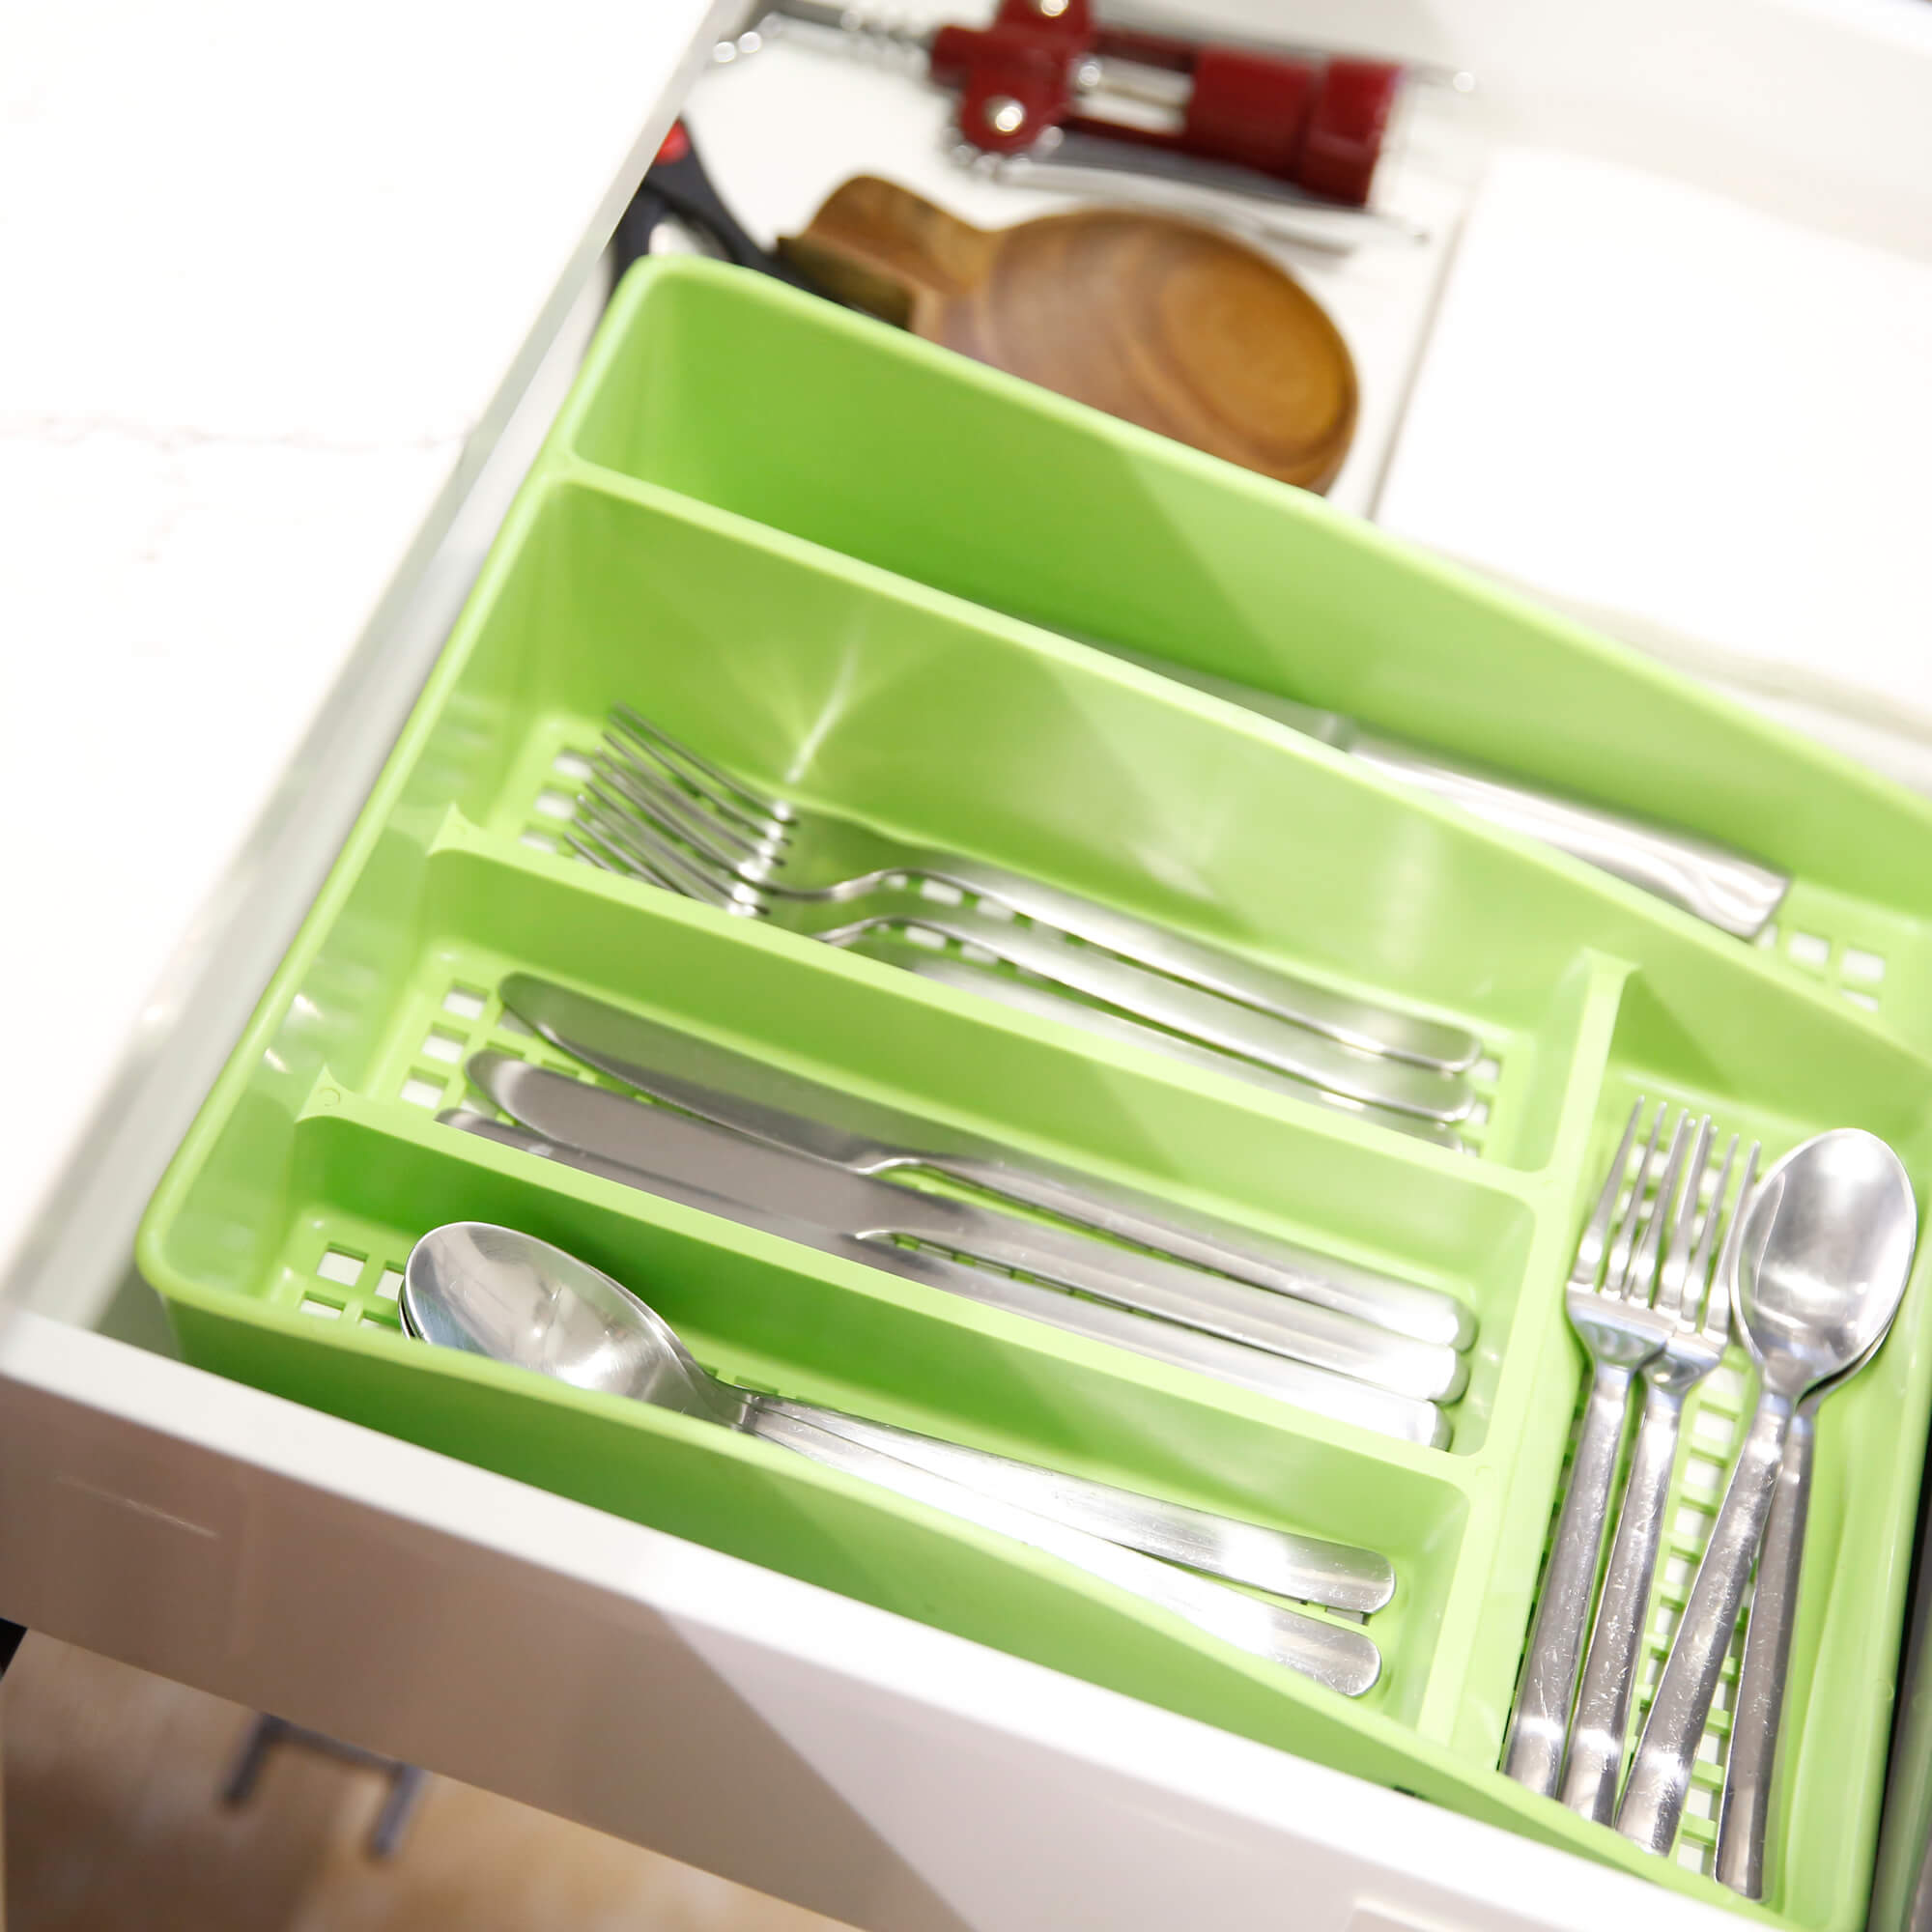 Large cutlery tray